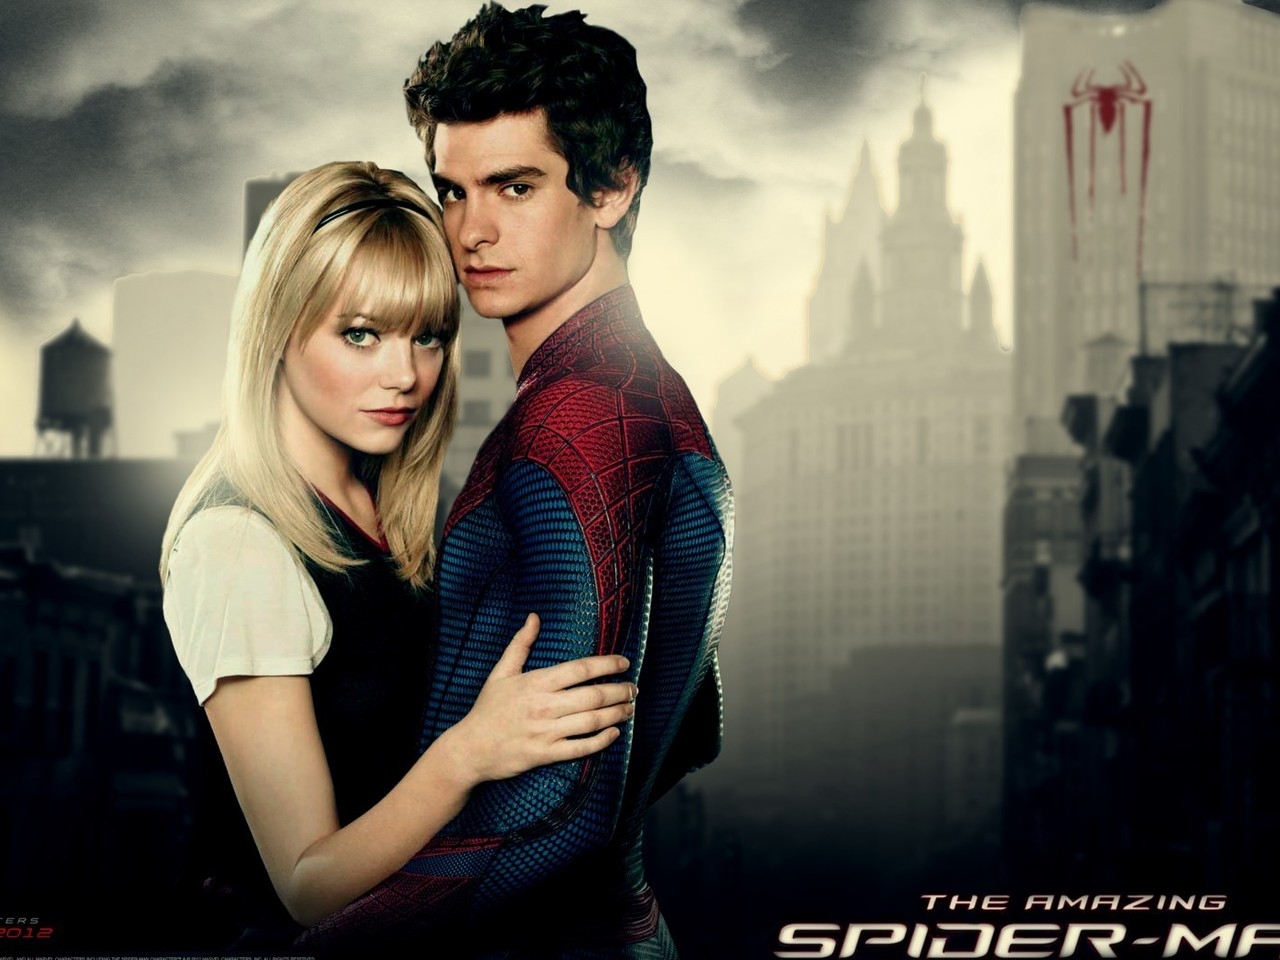 The Amazing Spider-Man Poster for 1280 x 960 resolution